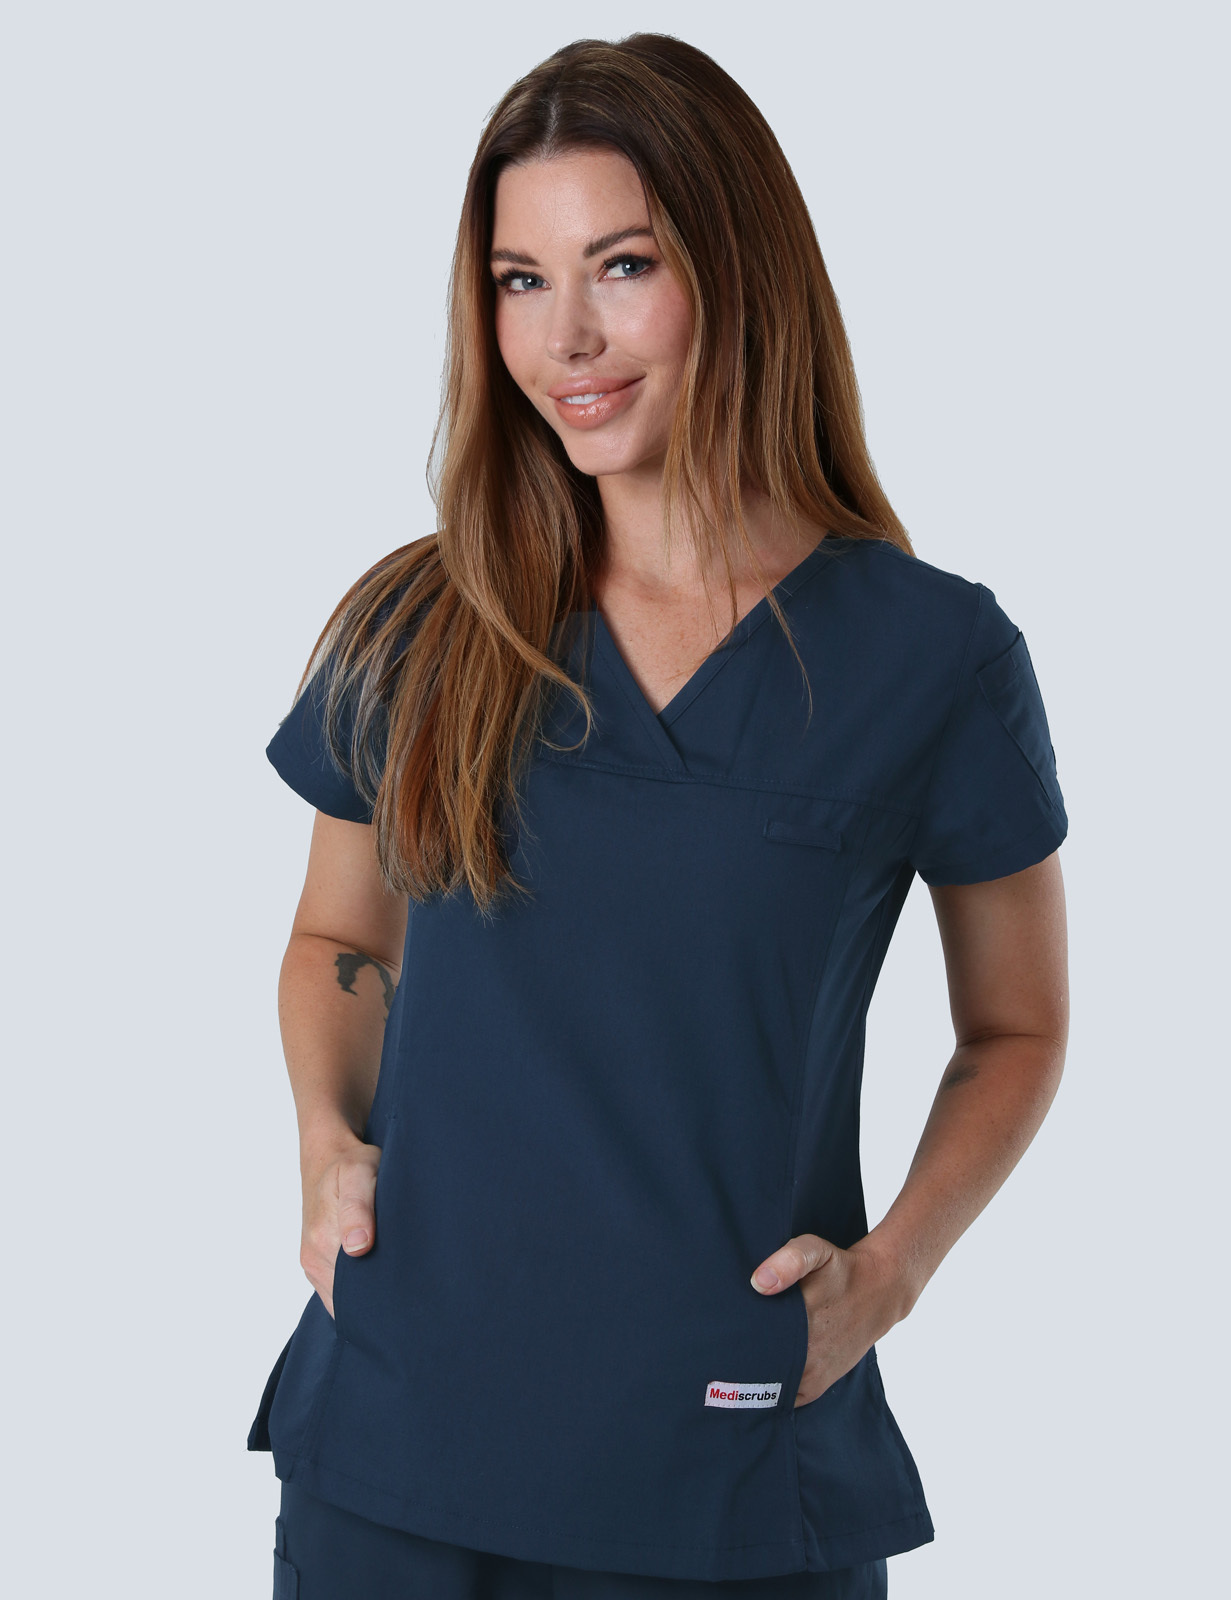 Inglewood MPHS - AIN (Women's Fit Solid Scrub Top and Cargo Pants in Navy incl Logos)